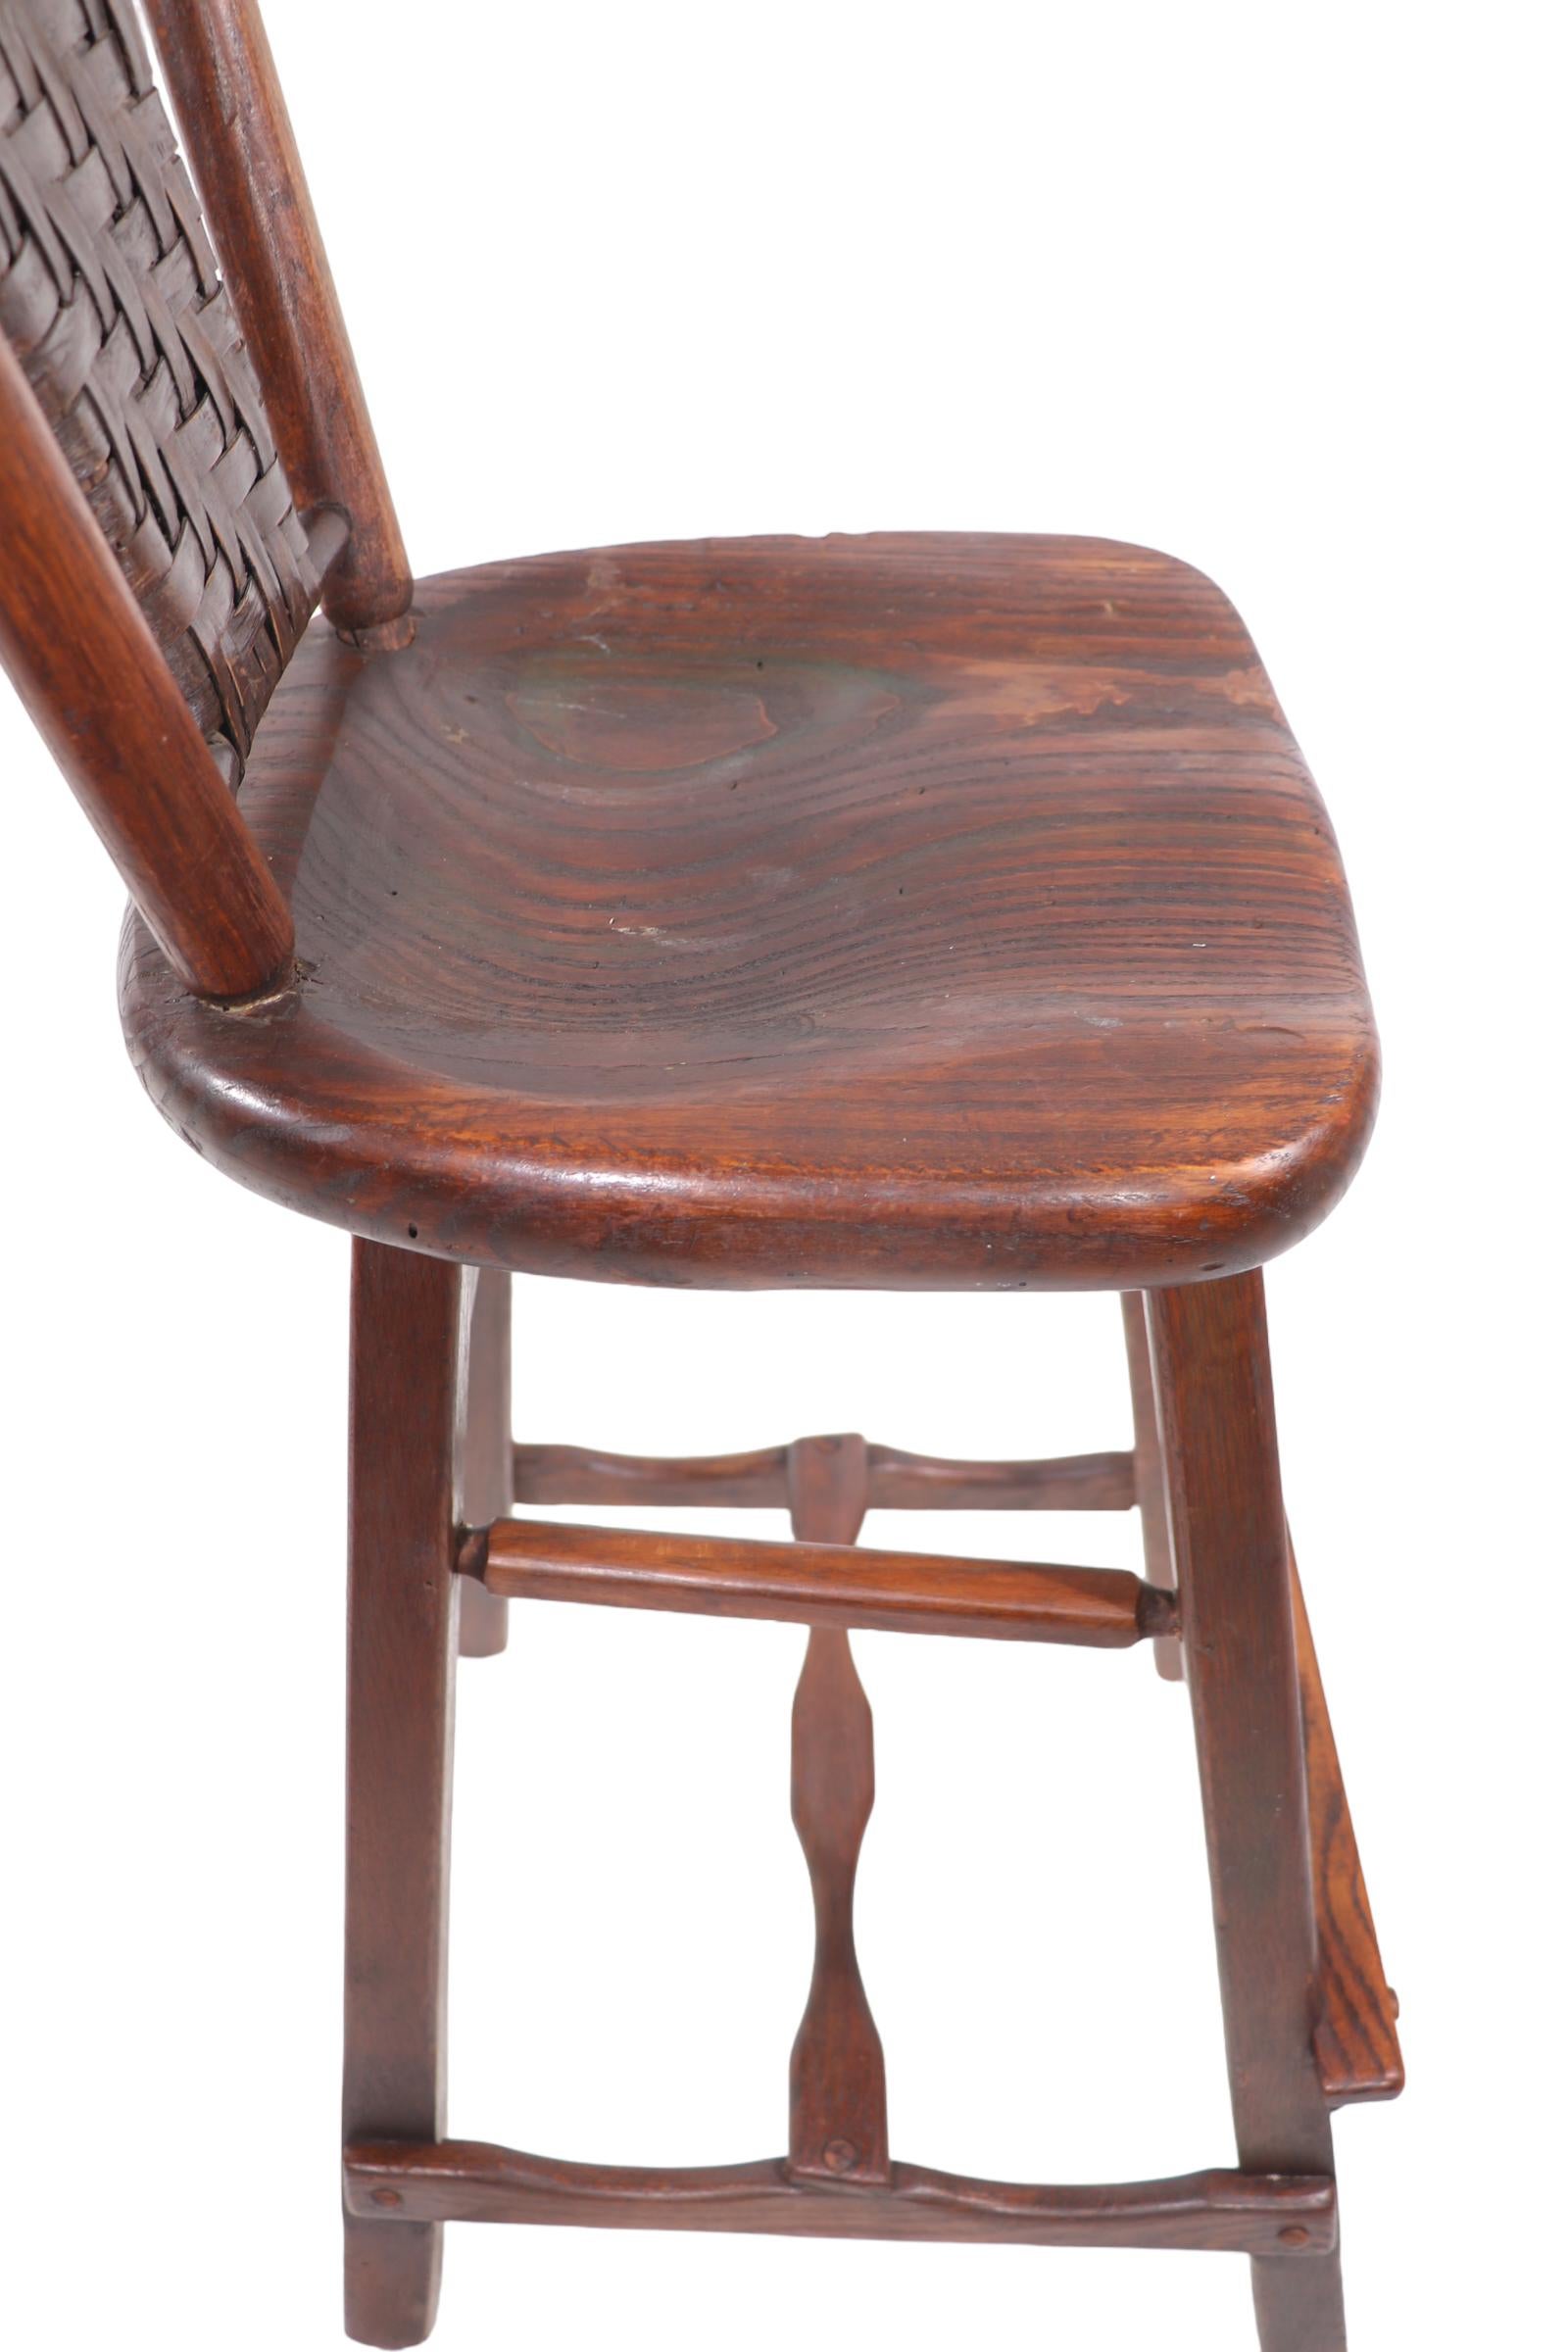 Mid-20th Century Rustic Old Hickory Bar  Stool c. 1940's For Sale